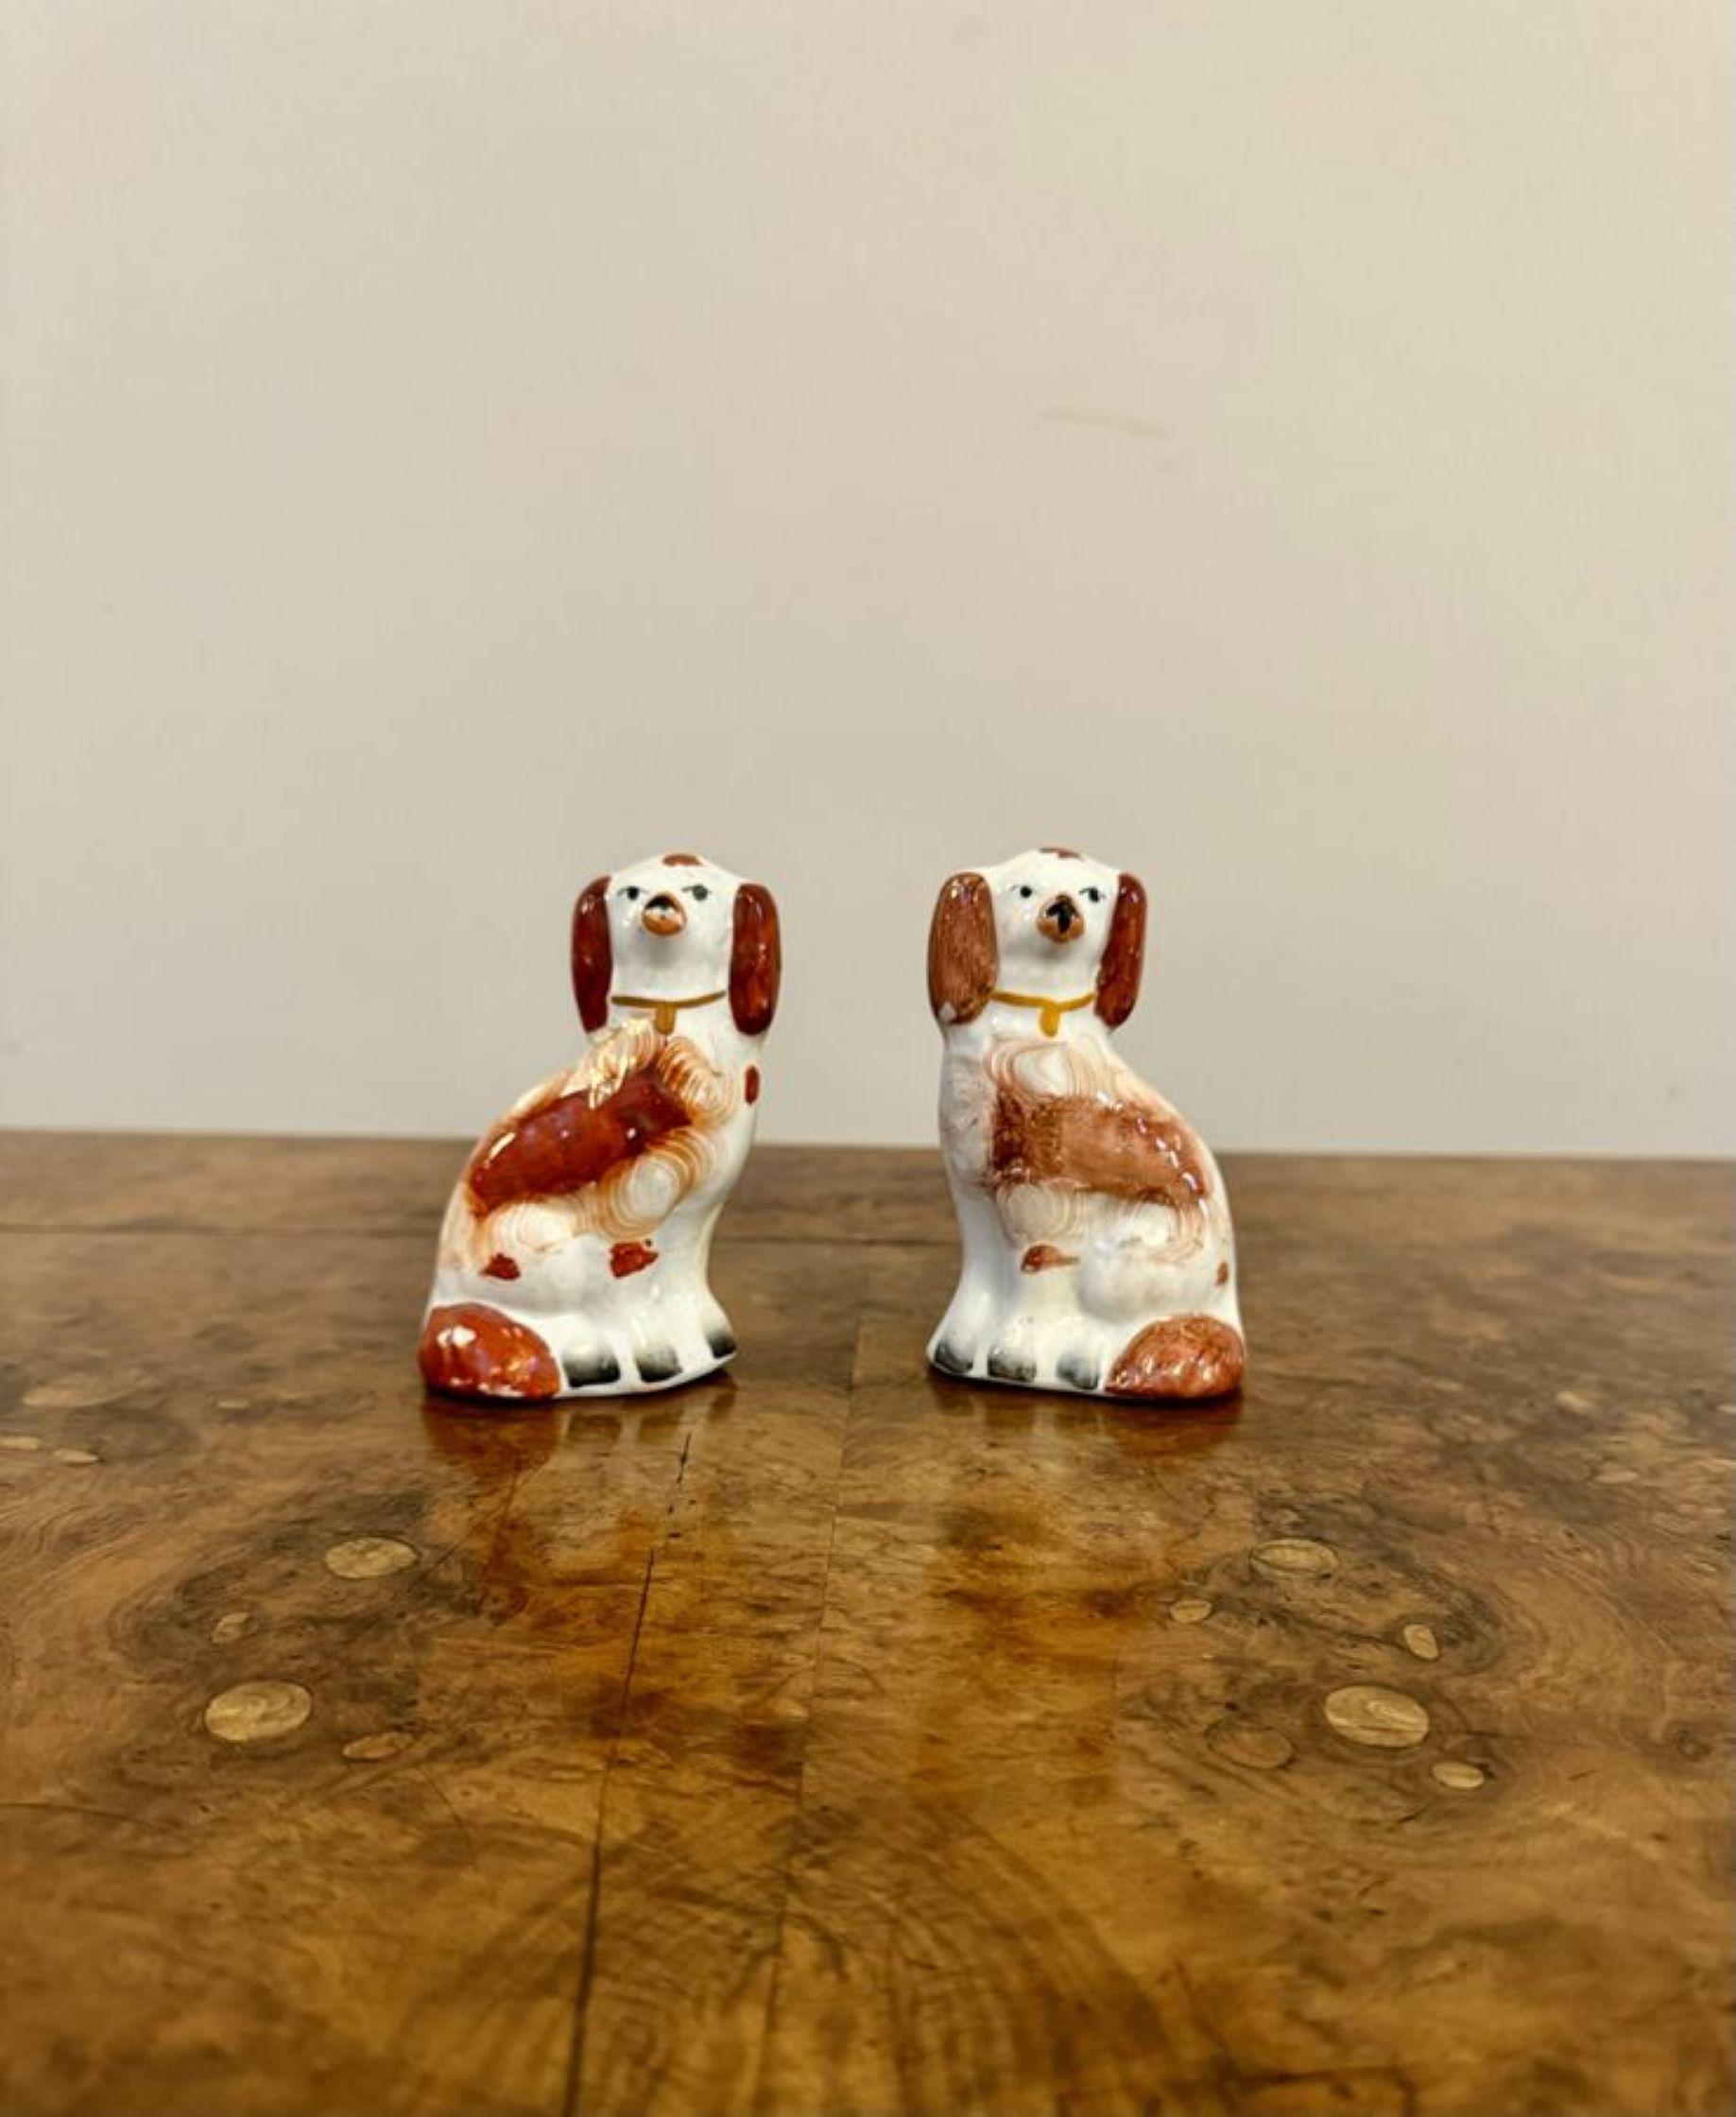 Lovely pair of antique Victorian miniature Staffordshire dogs, having a lovely pair of antique Victorian Staffordshire dogs with matching coats and collars.

D. 1880